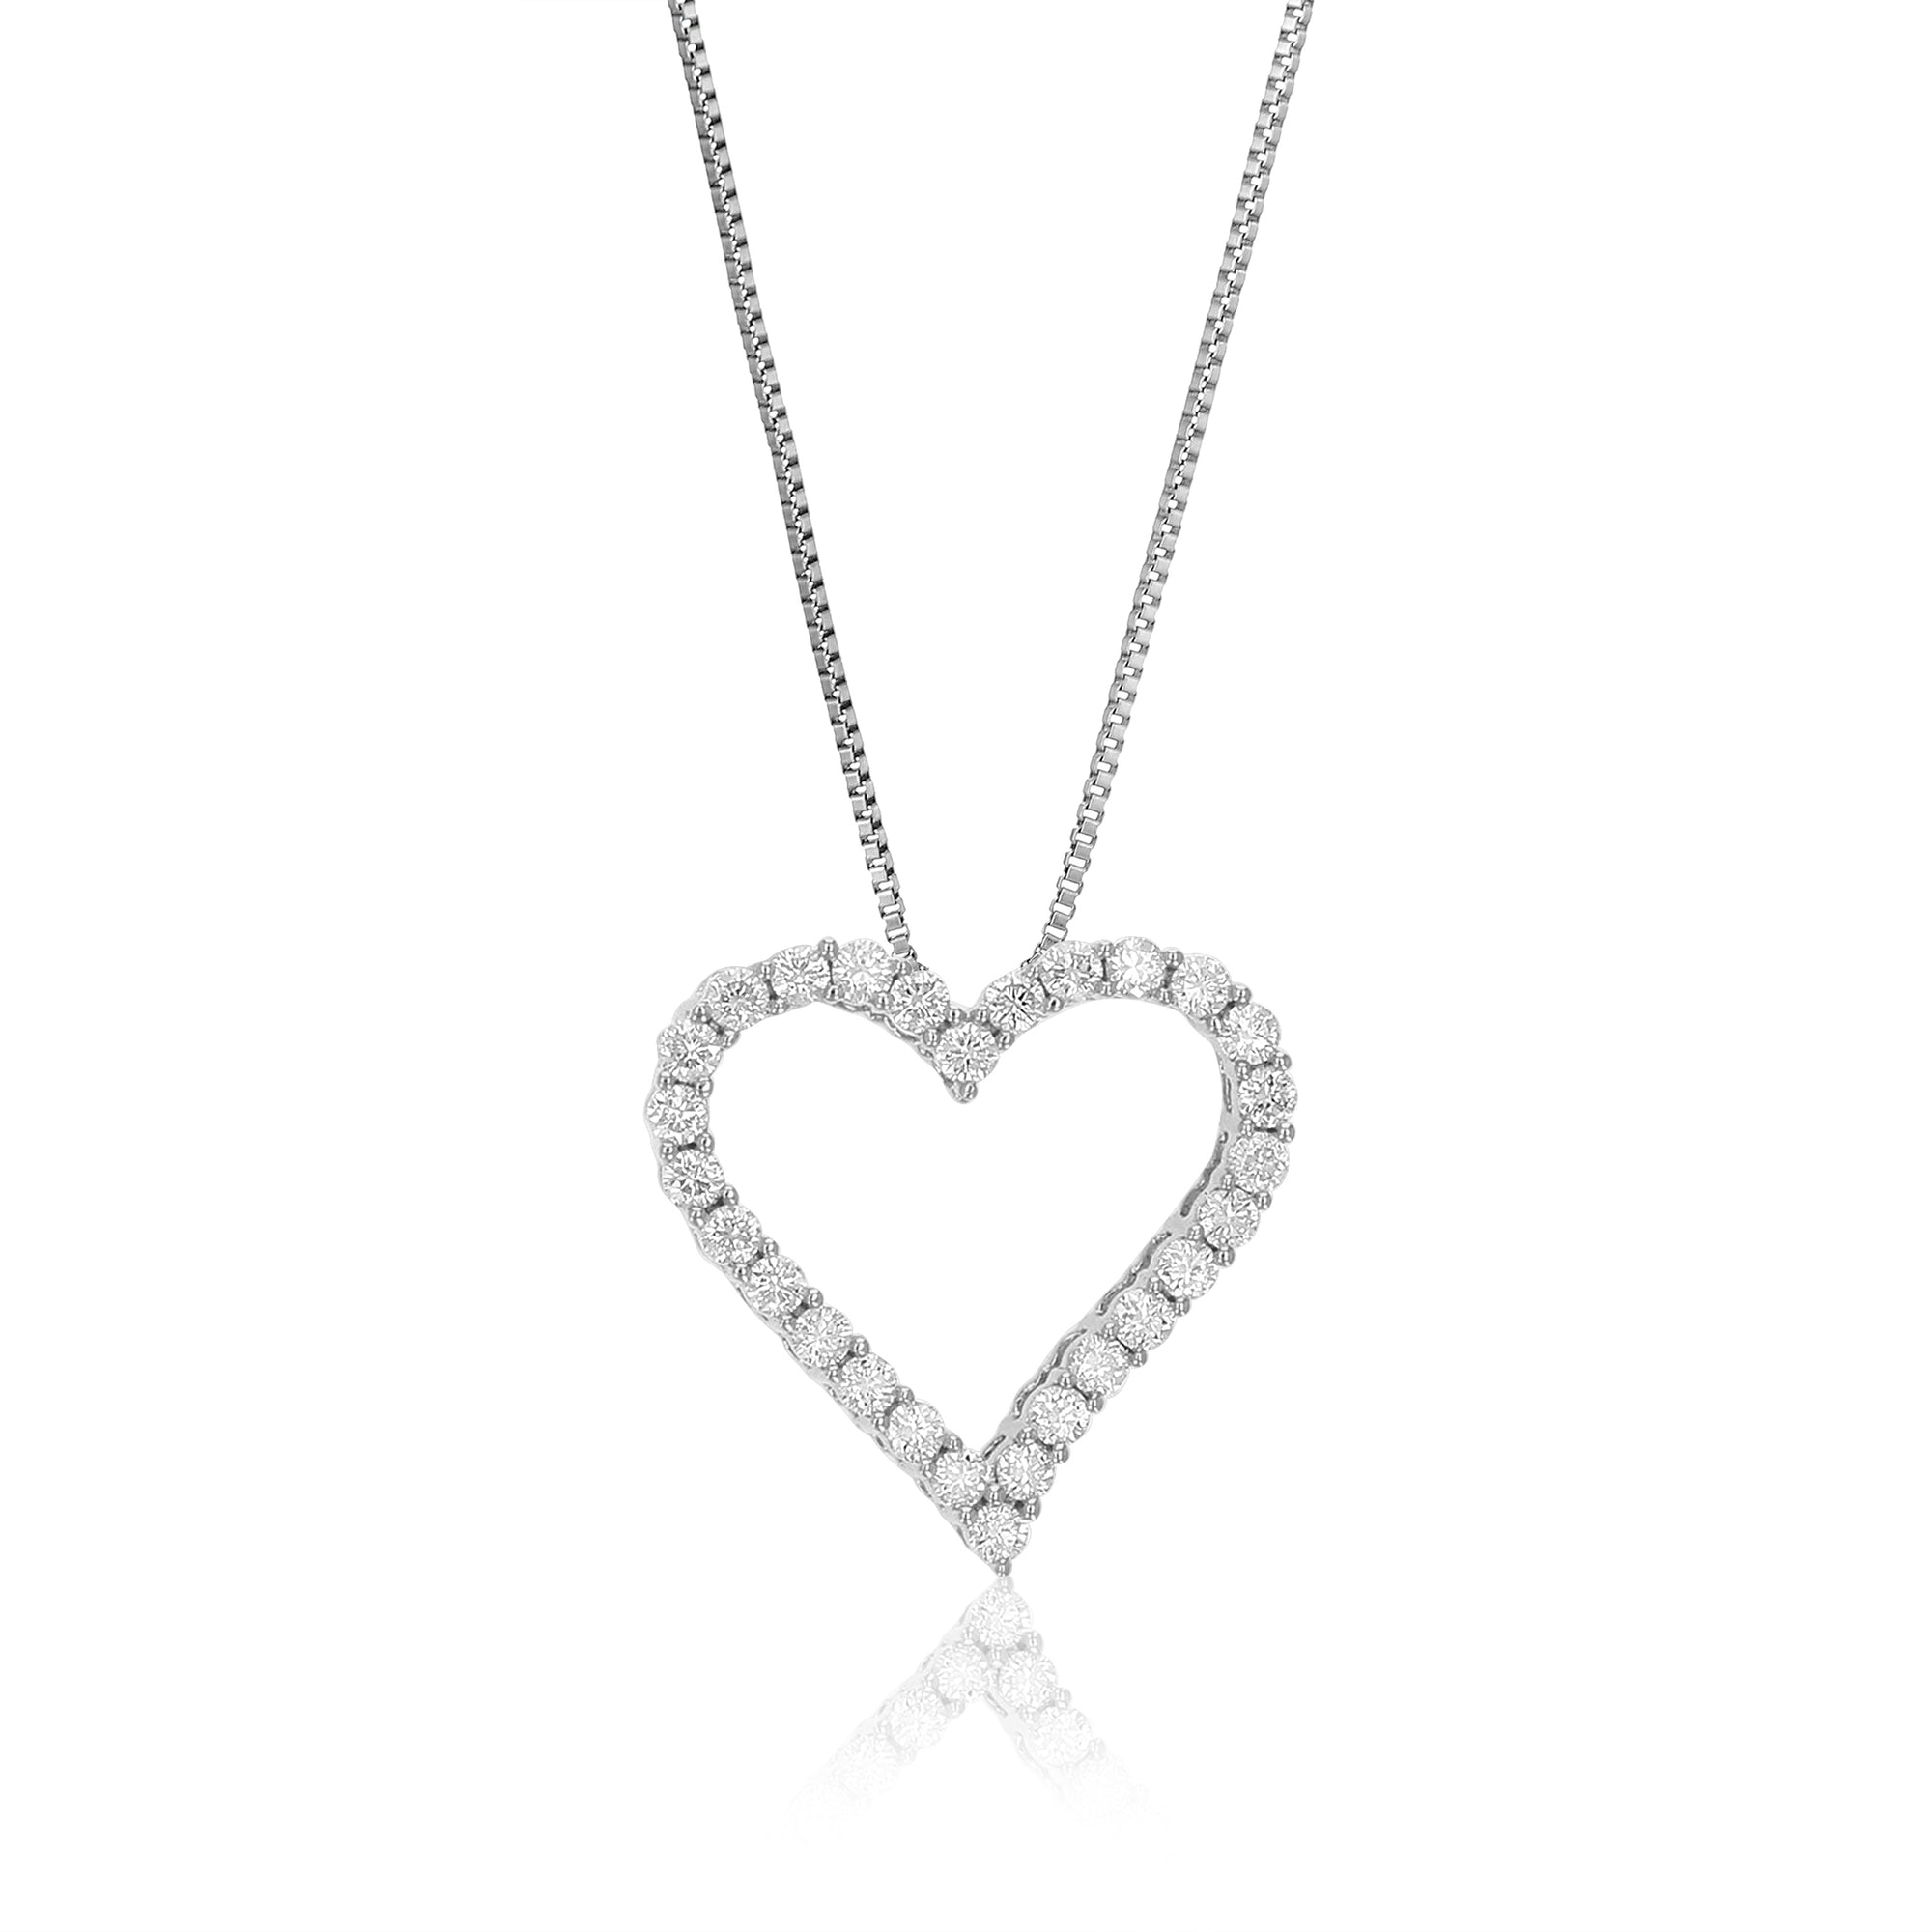 1/2 cttw Diamond Pendant Necklace for Women, Lab Grown Diamond Heart Pendant Necklace in .925 Sterling Silver with Chain, Size 2/3 Inch